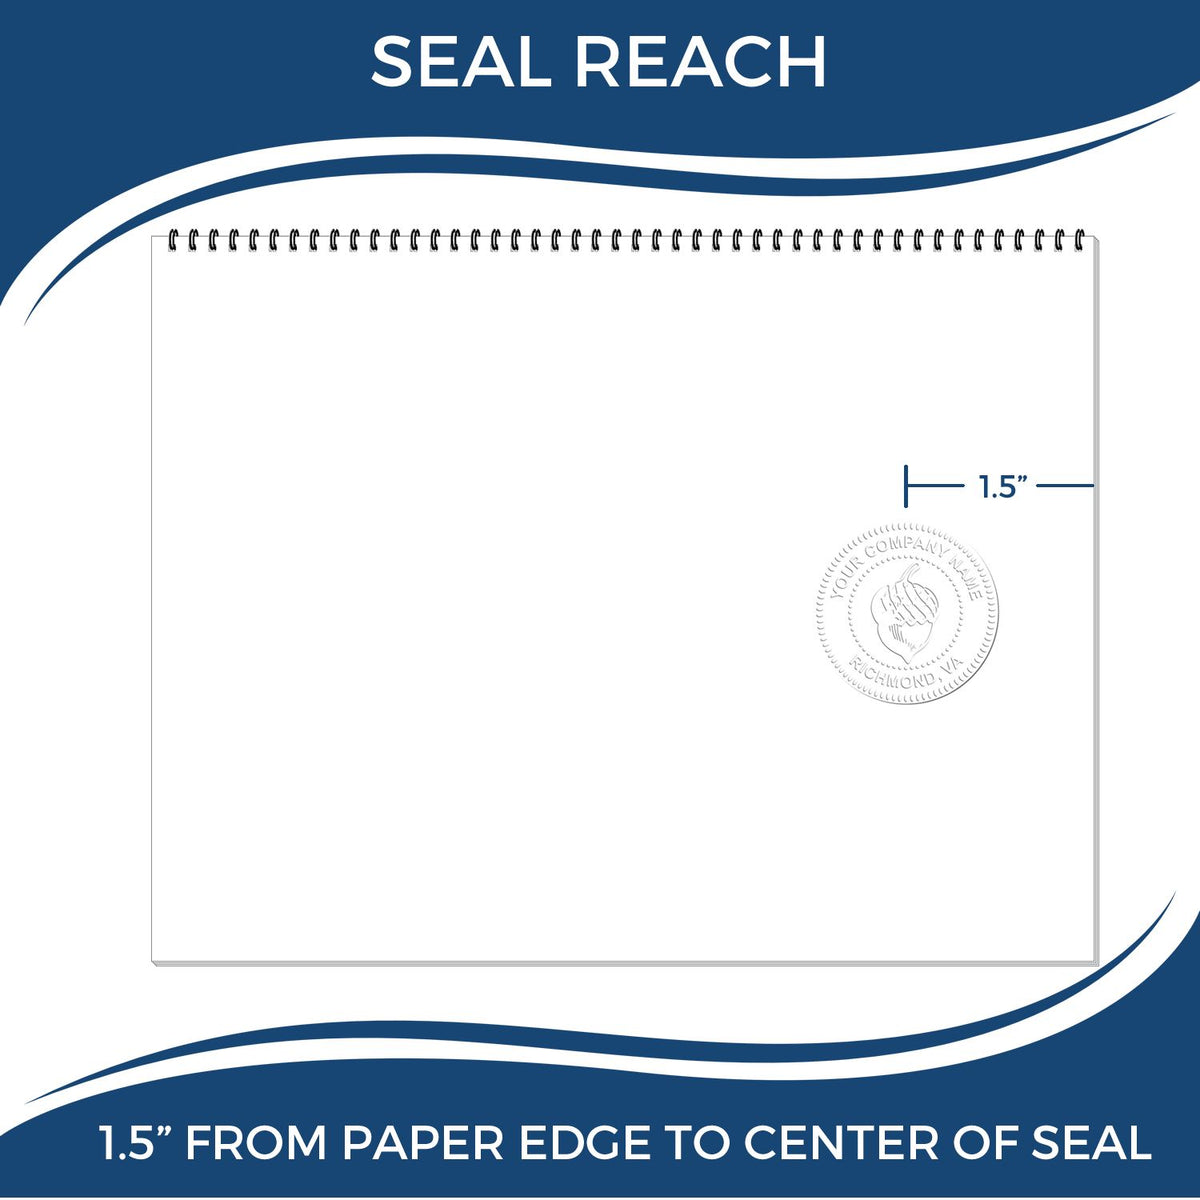 An infographic showing the seal reach which is represented by a ruler and a miniature seal image of the Hybrid Delaware Land Surveyor Seal